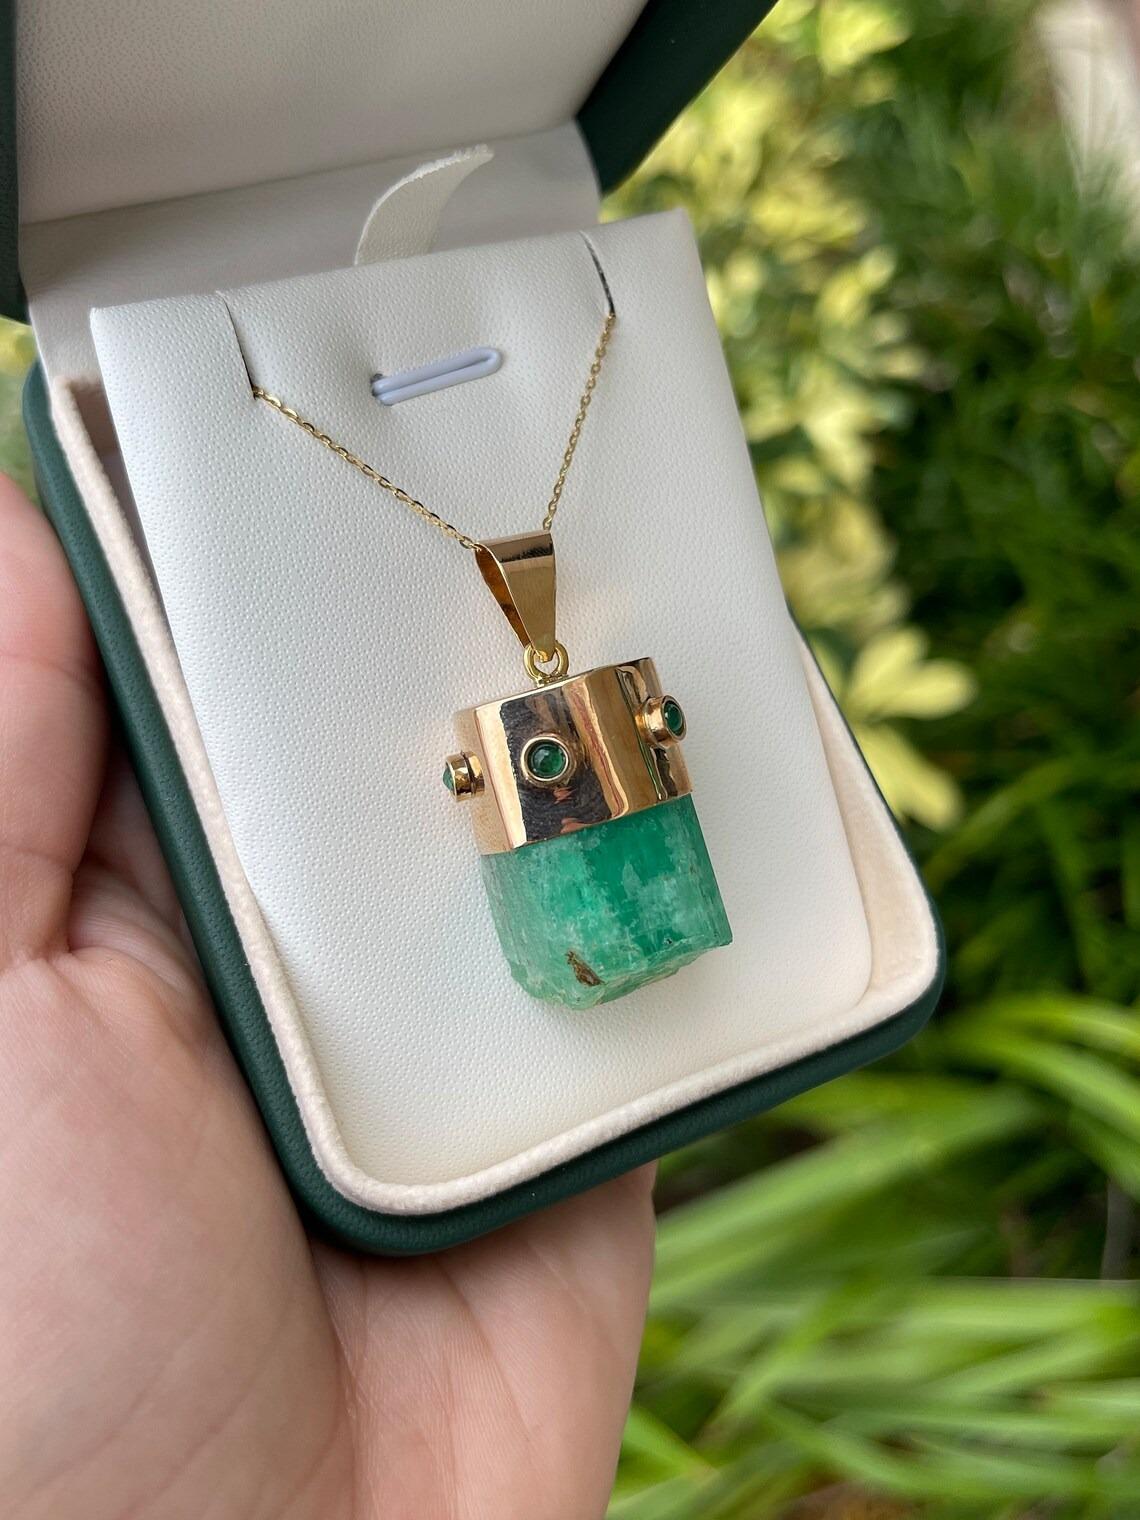 colombian emerald necklace